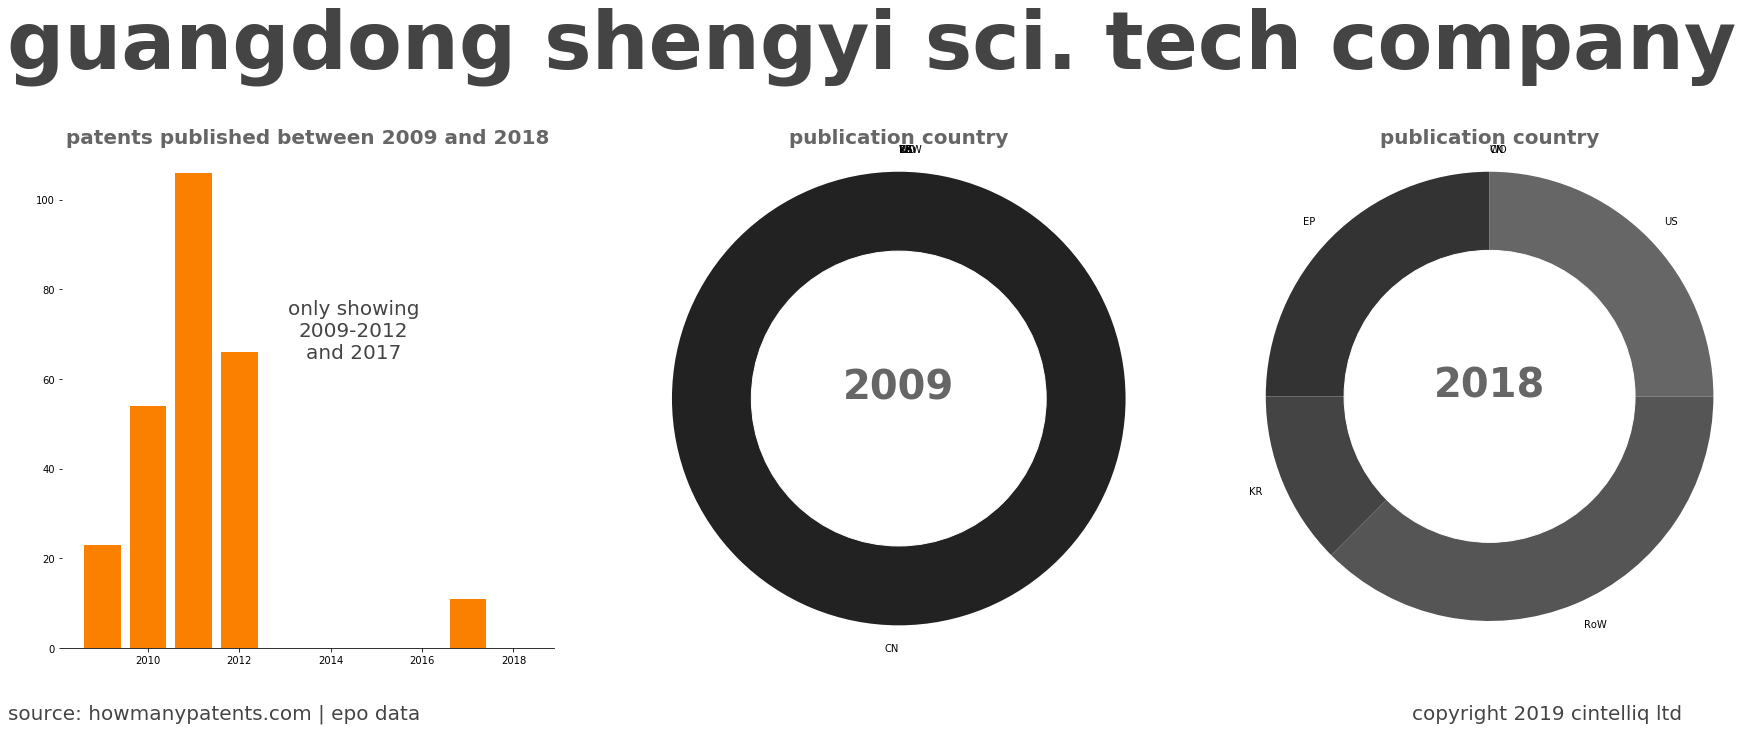 summary of patents for Guangdong Shengyi Sci. Tech Company